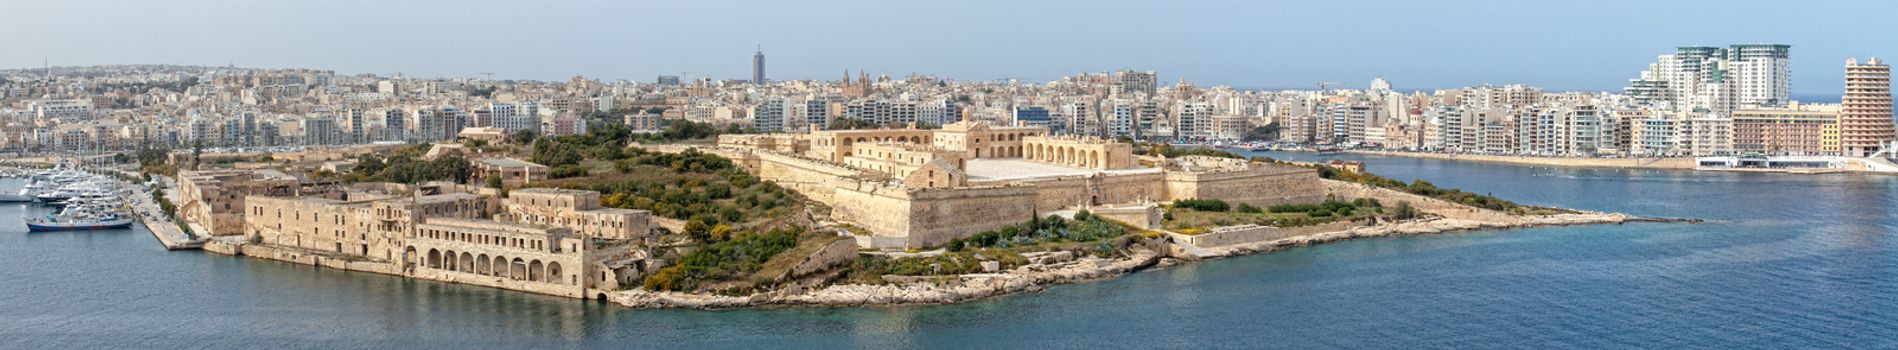 A panoramic view of Manoel Island, and the recently restored Fort carrying the same name.  On the left is the old Lazzaret Hospital and RN submarine depot; to the right the modern skyline of Sliema.